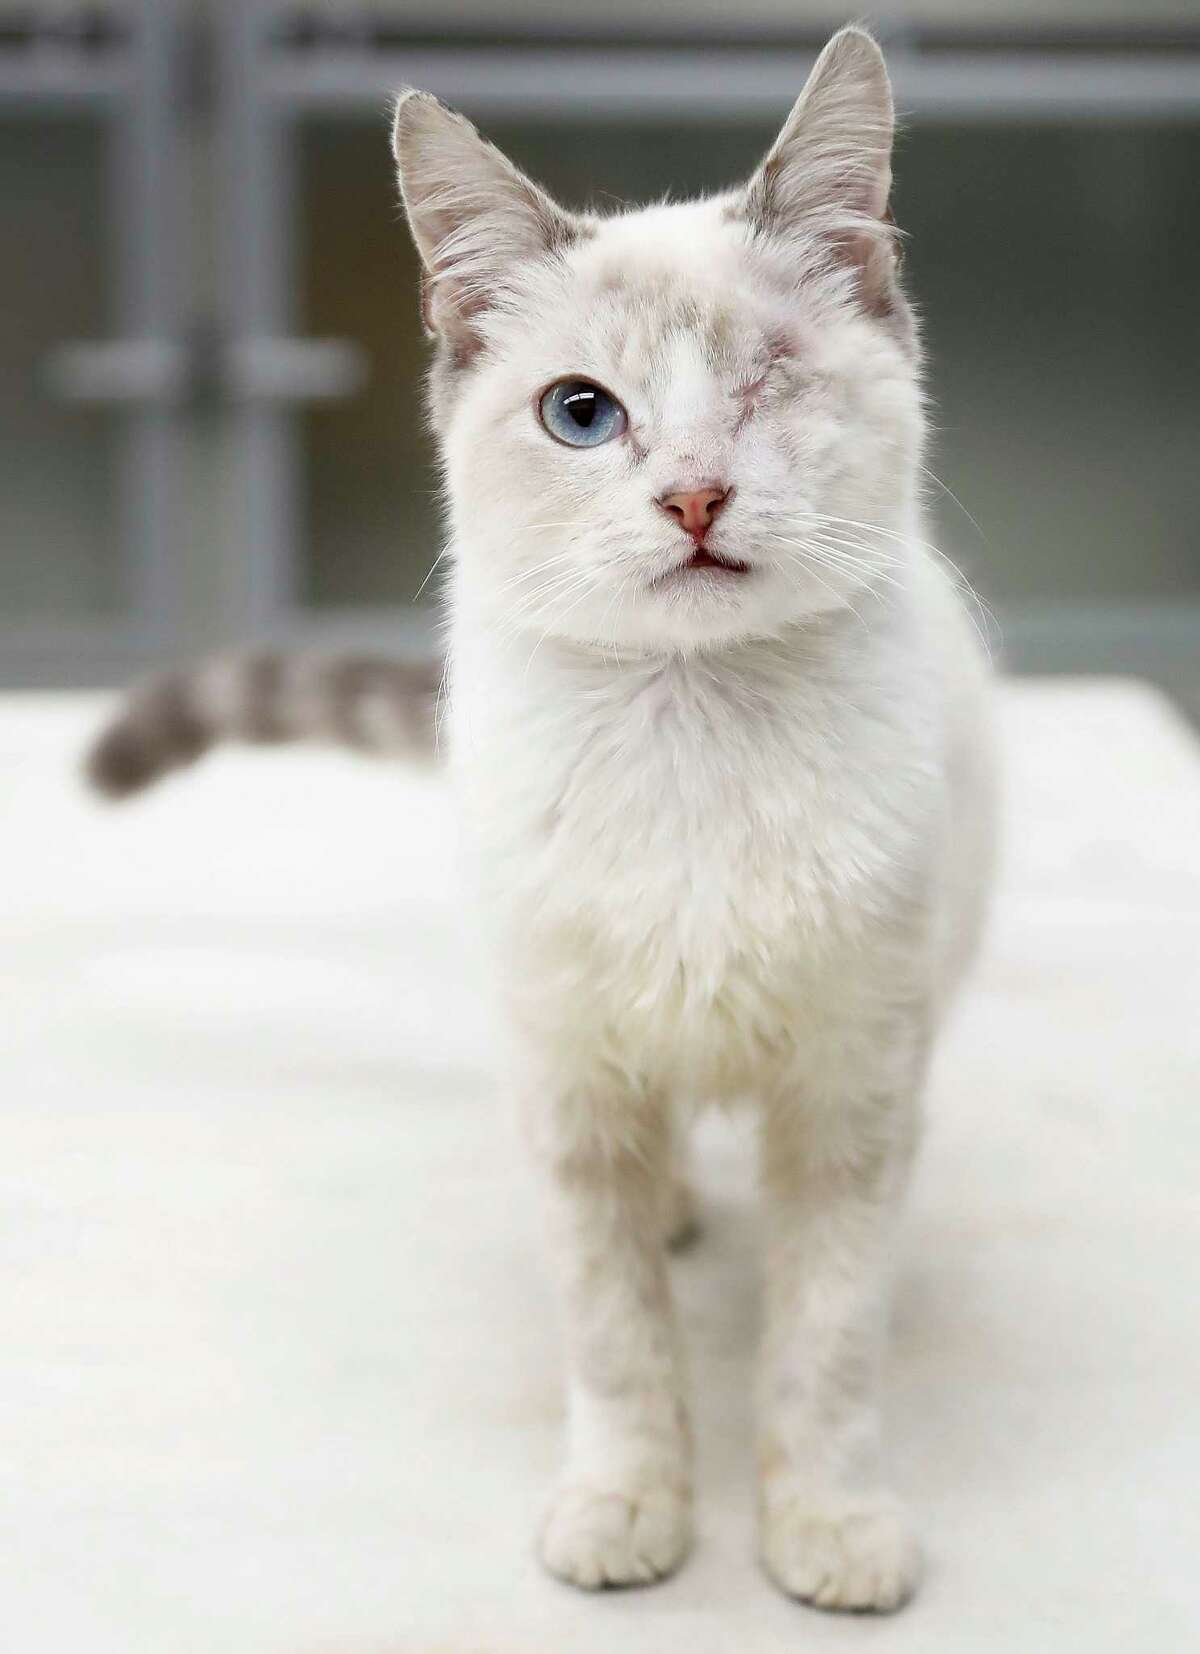 LEO (Animal ID: 376910) Leo is a 6-month-old Lilac Point kitten found with an injury to his eye that couldn’t be repaired, which was sugically removed, and now Leo loves to be held and petted, as well as chase toys and is available for adpotion from the Houston SPCA. Photographed Monday, Nov. 19, 2018, in Houston.